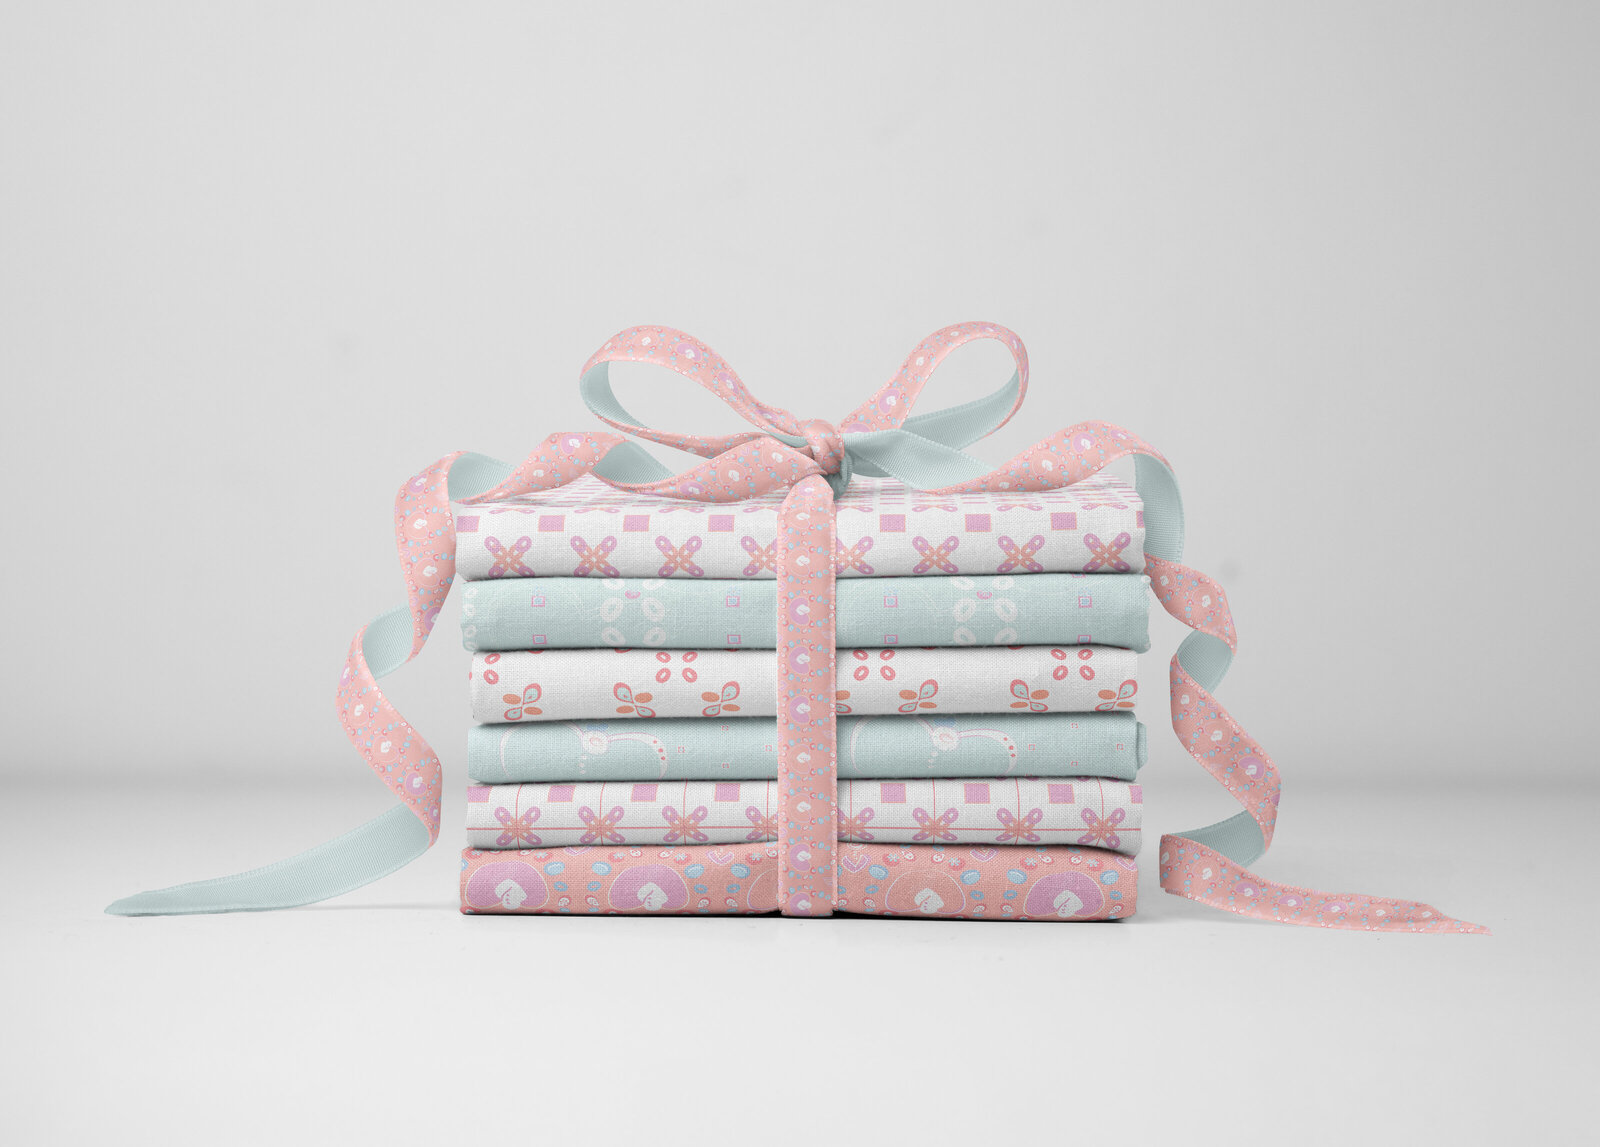 Stack of patterned fabrics tied with a bow